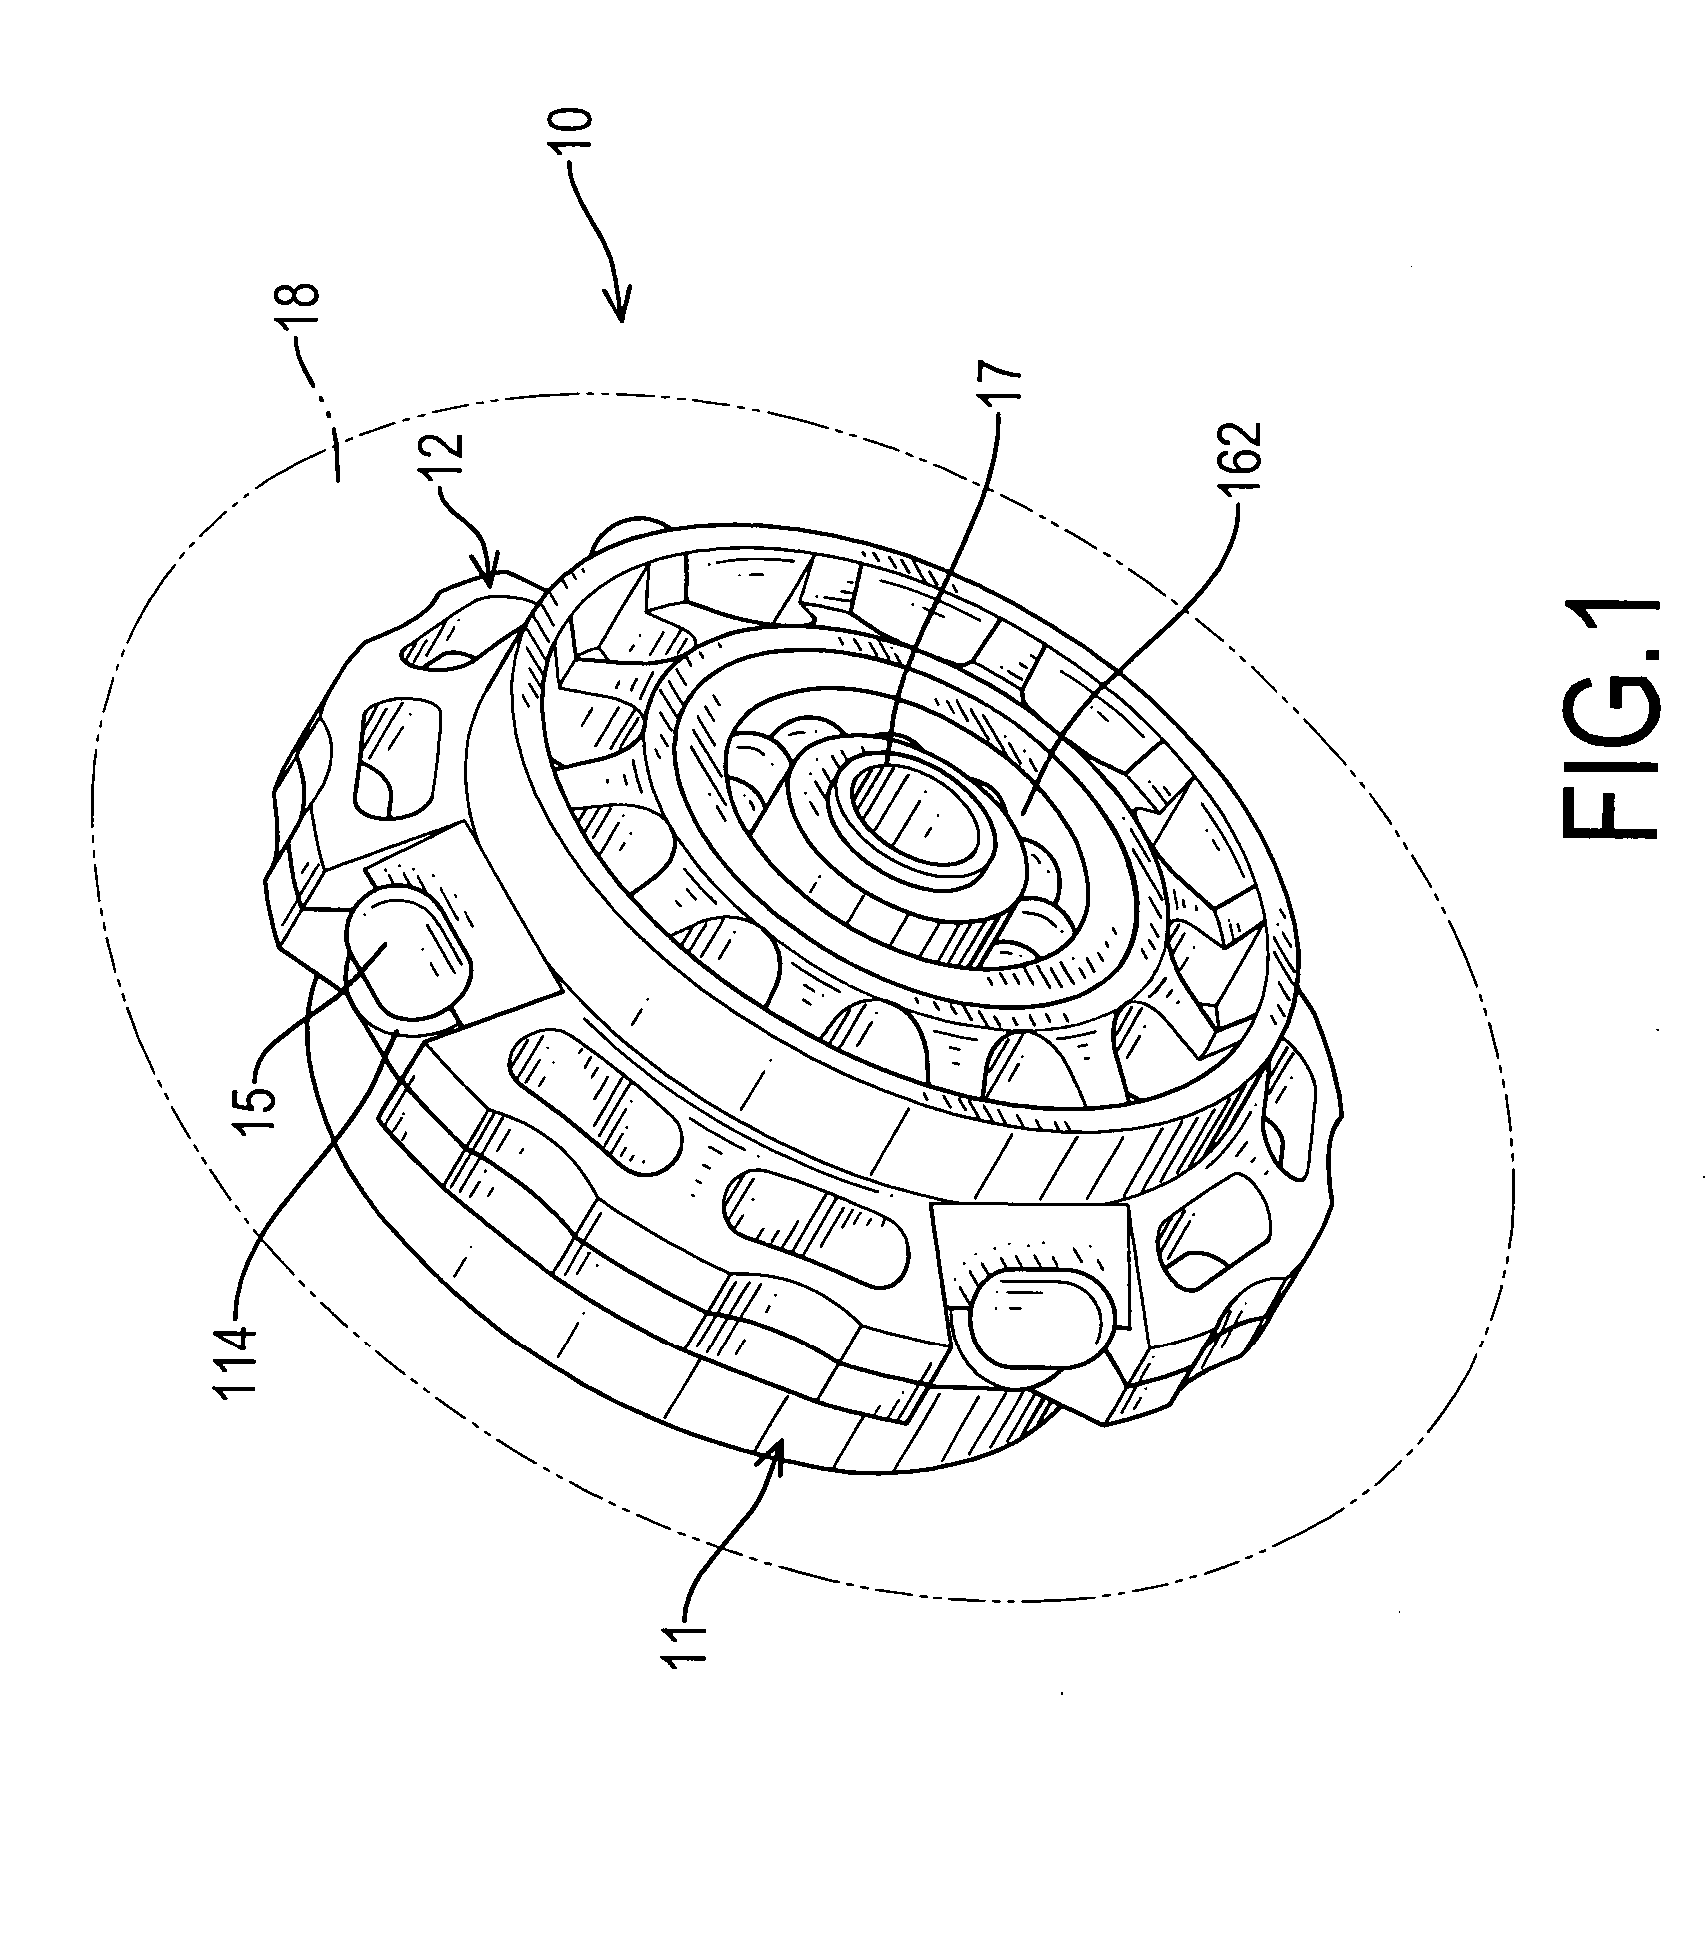 Skate wheel having skew-mounted and self-powered illuminating devices